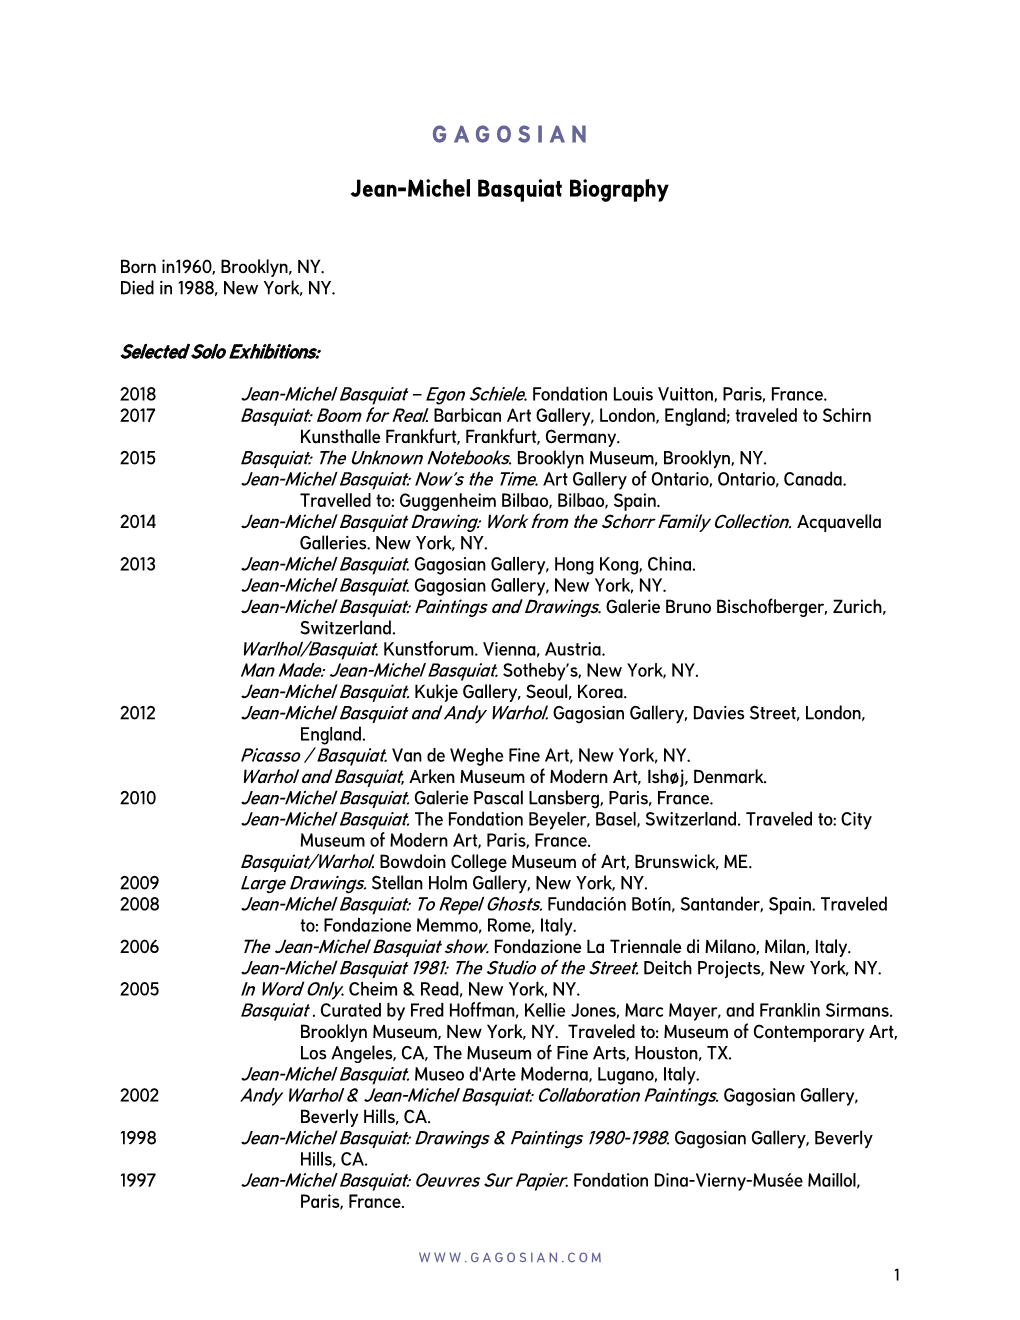 Selected Exhibition History (PDF)